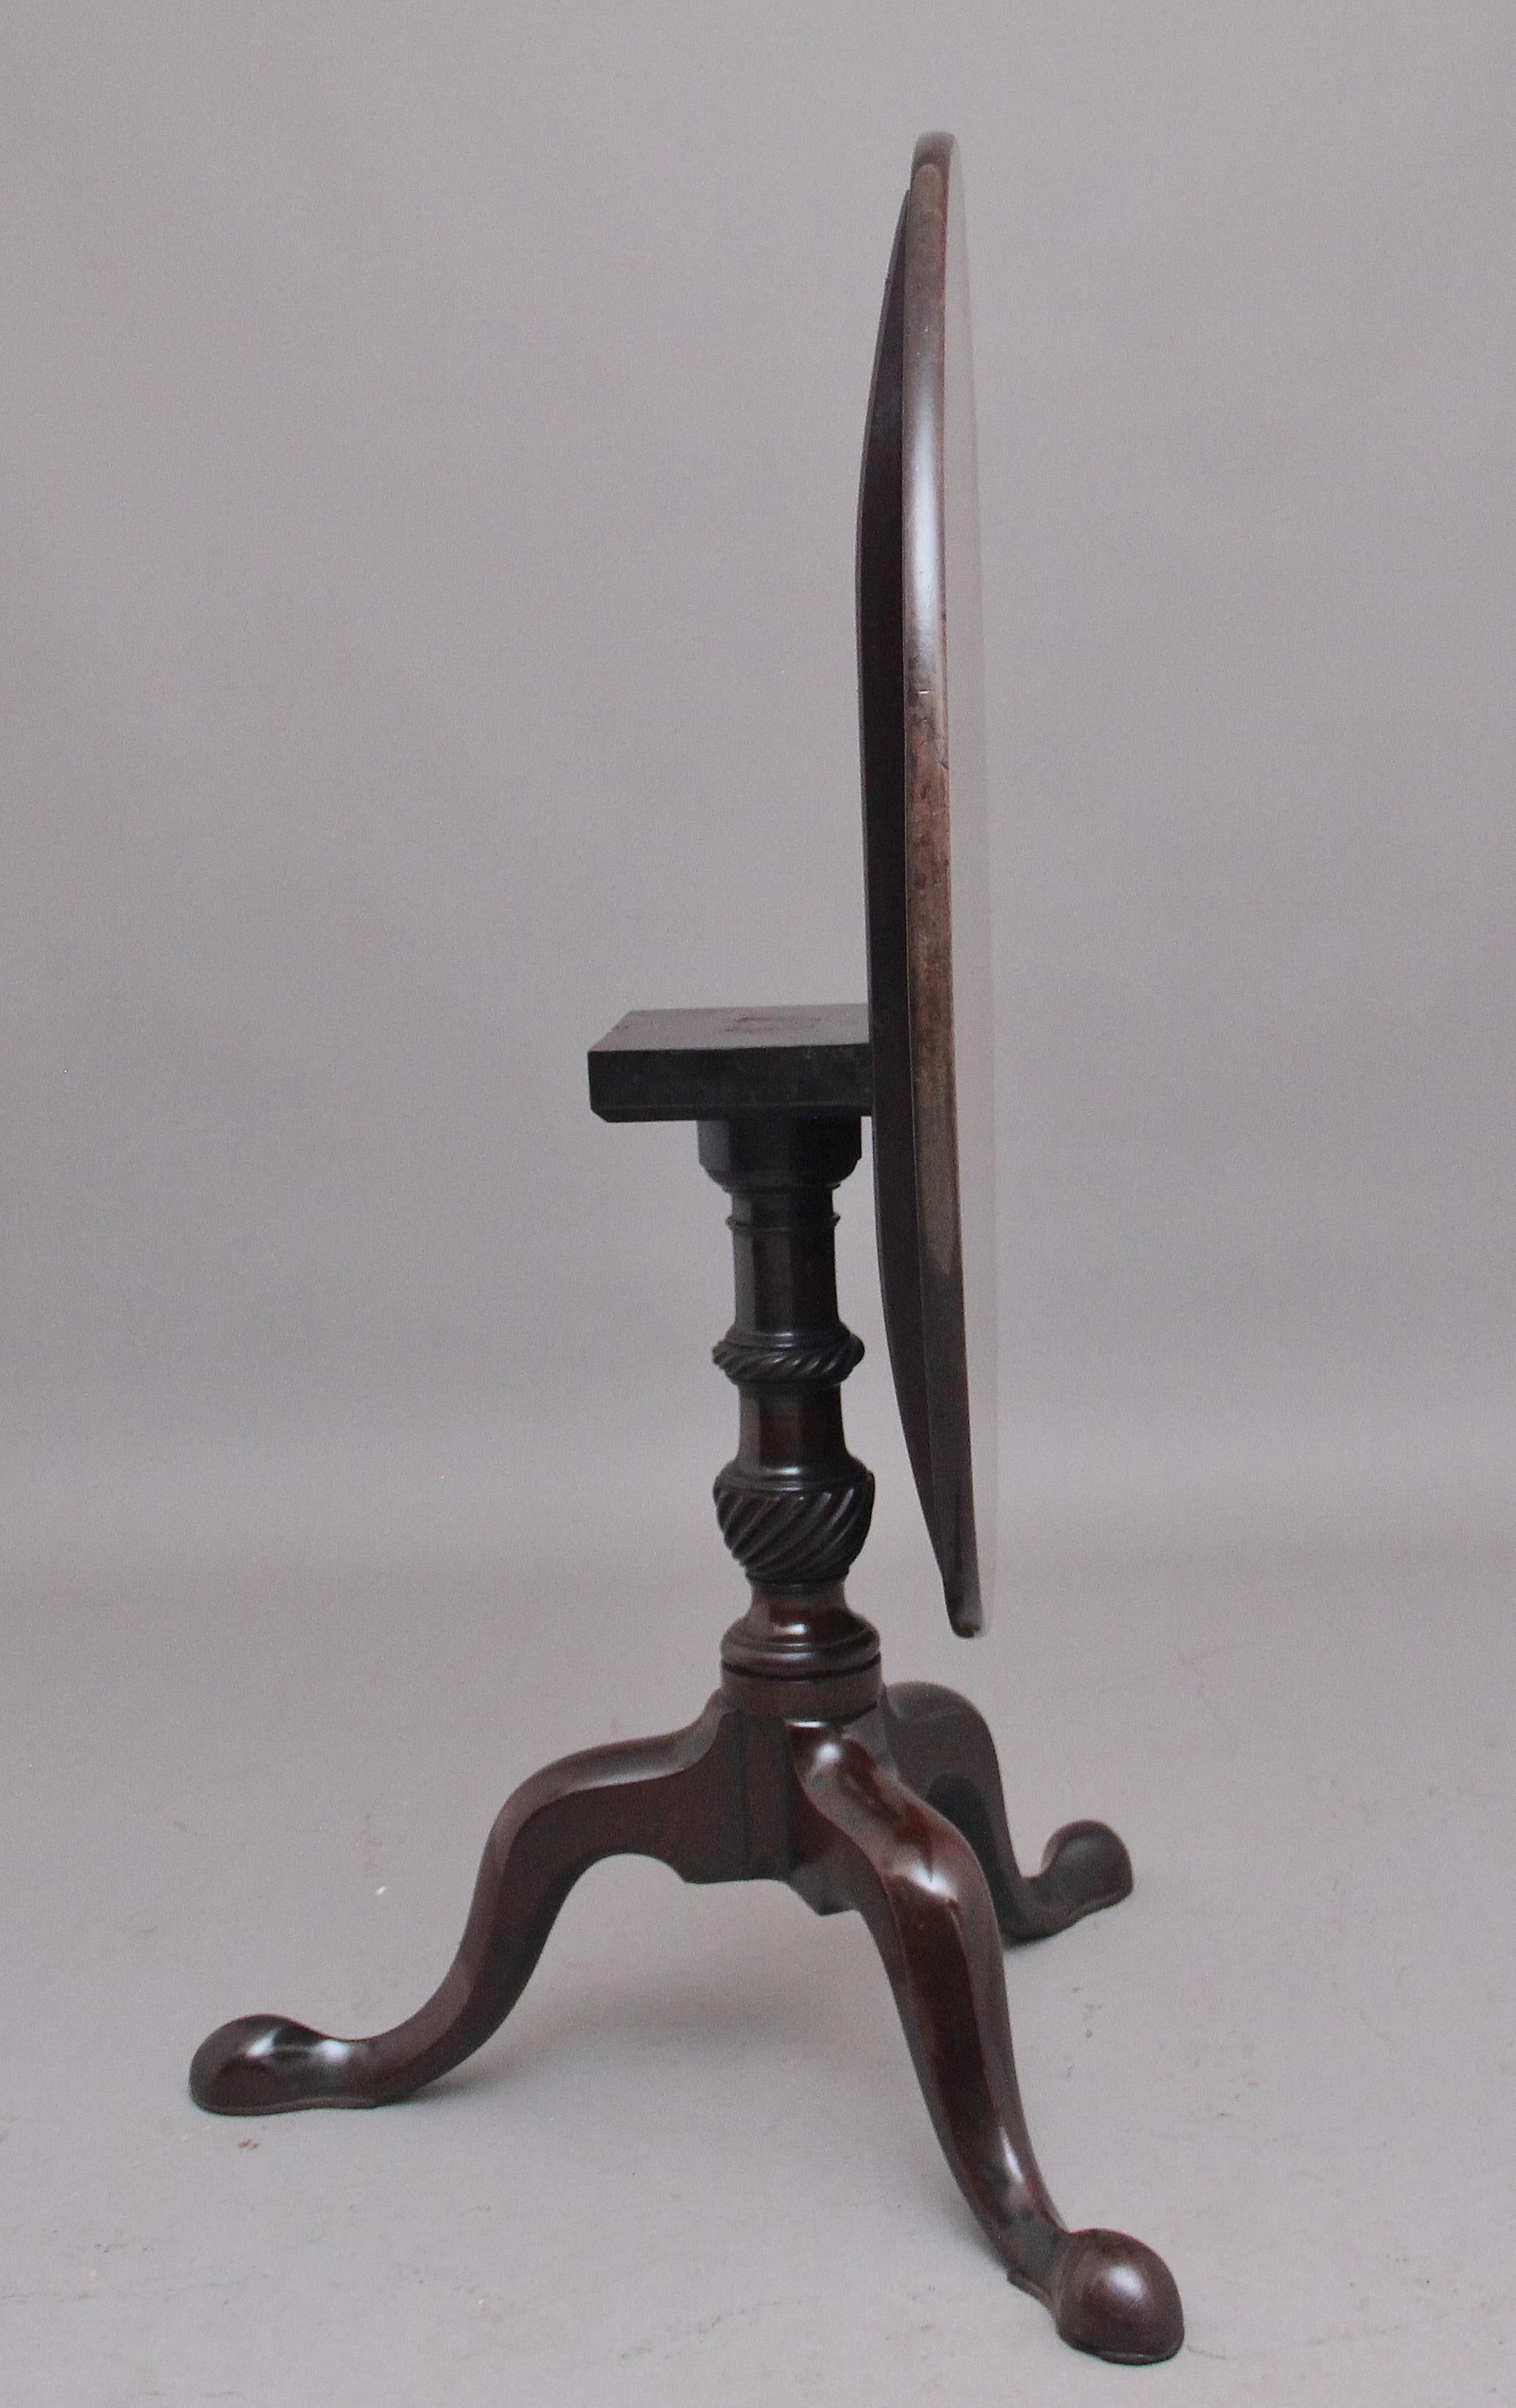 Georgian 18th Century Mahogany Tripod Table with a Carved Column